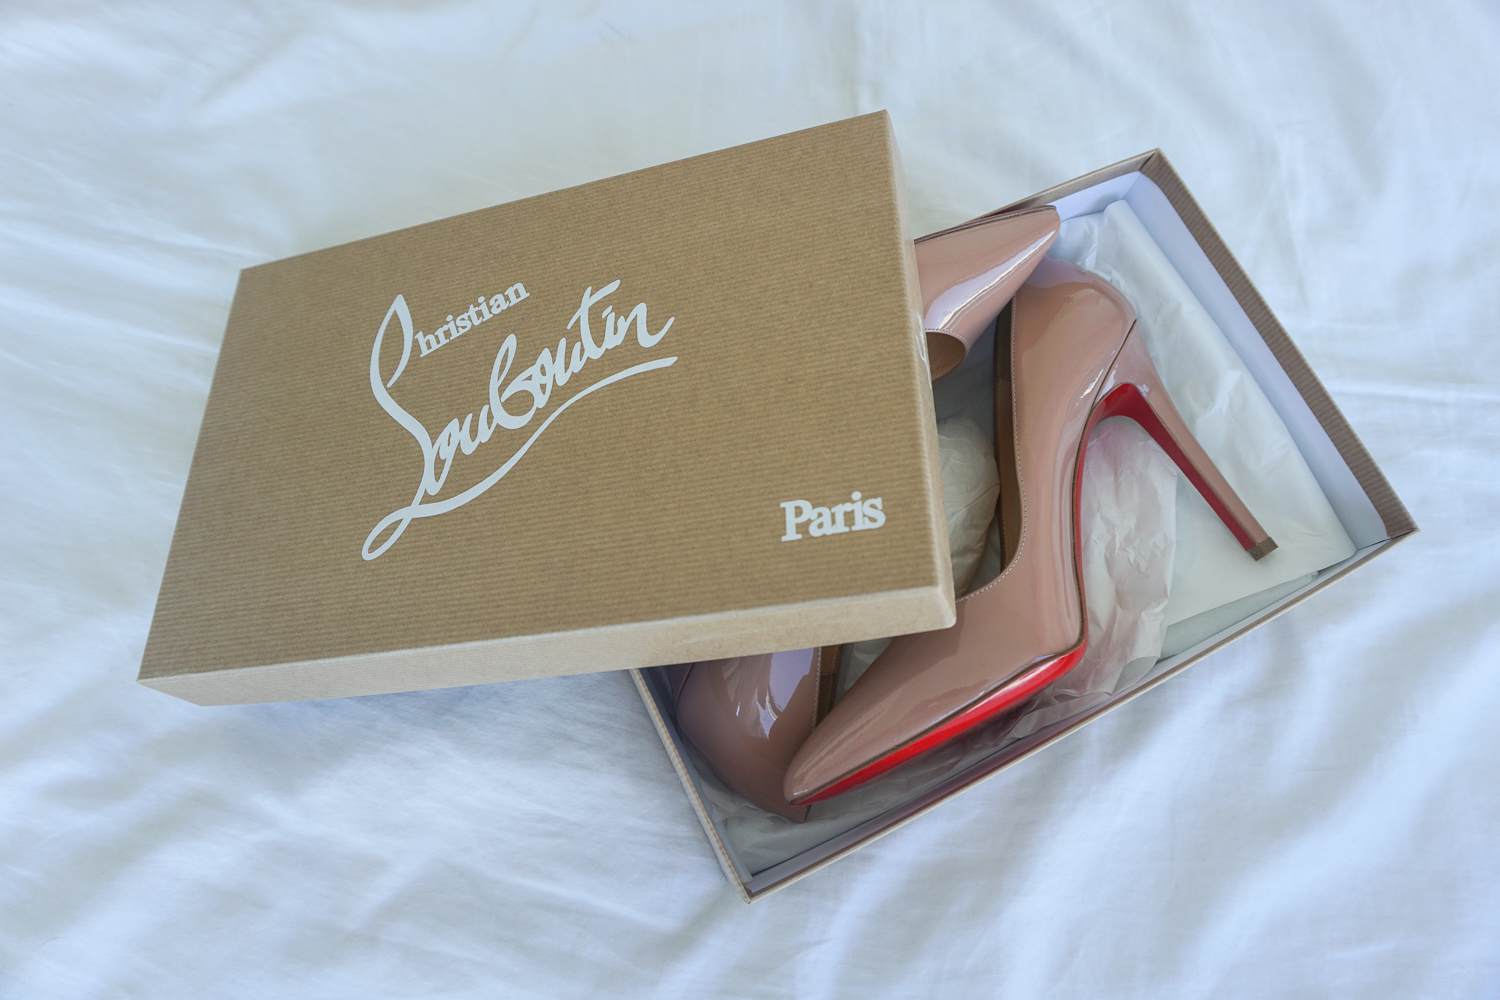 32 Gorgeous Louboutin Heels That You Absolutely MUST See!